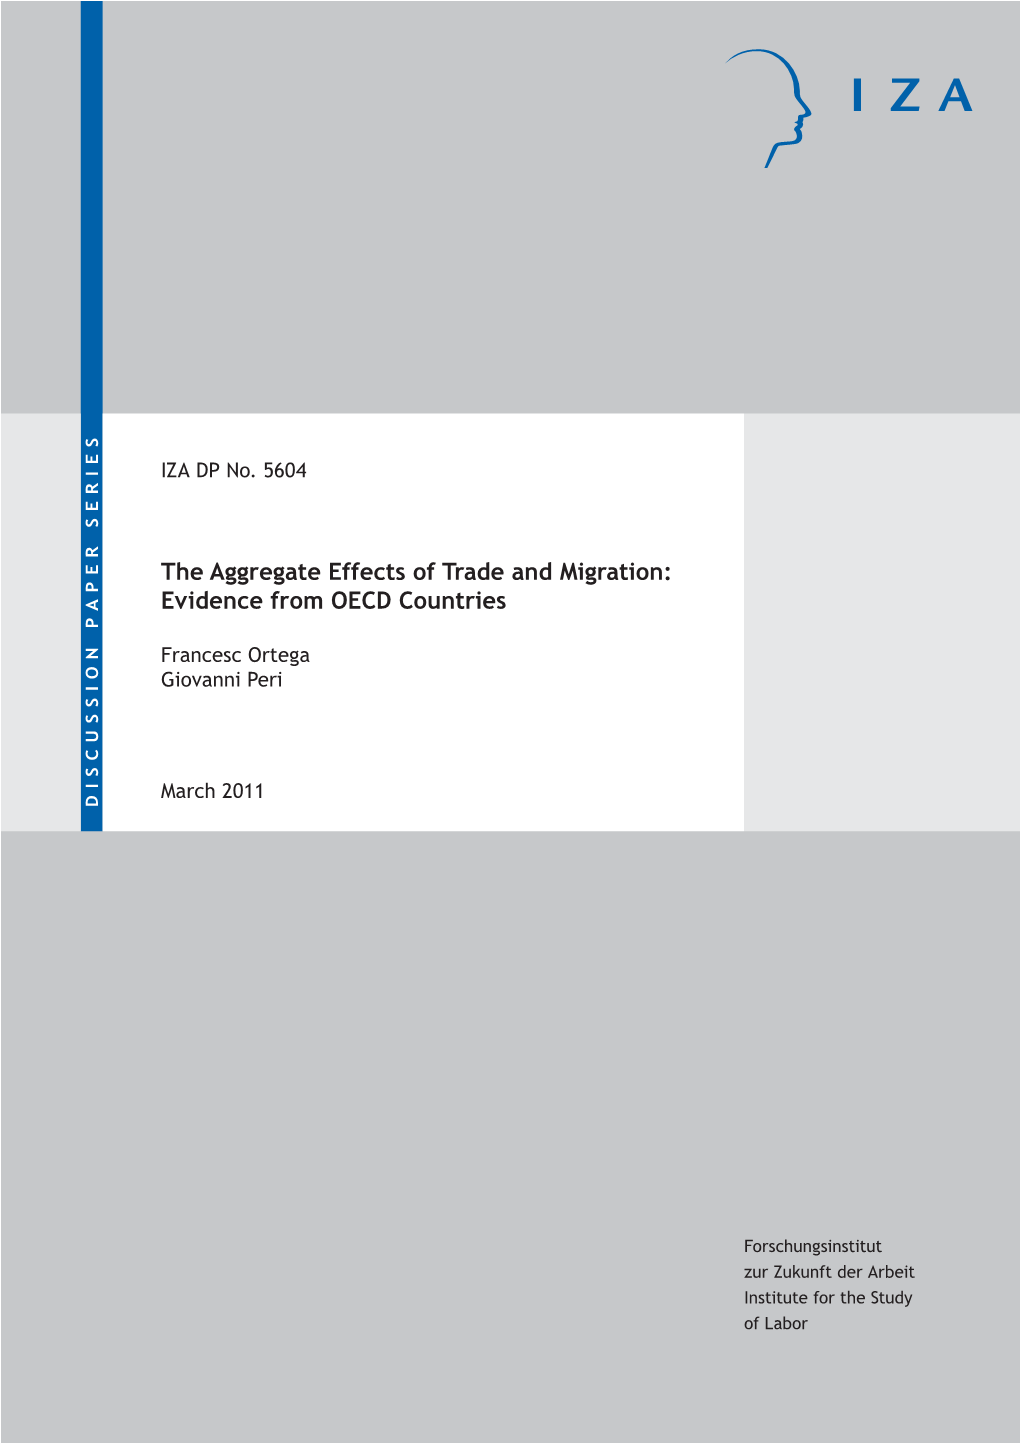 The Aggregate Effects of Trade and Migration: Evidence from OECD Countries